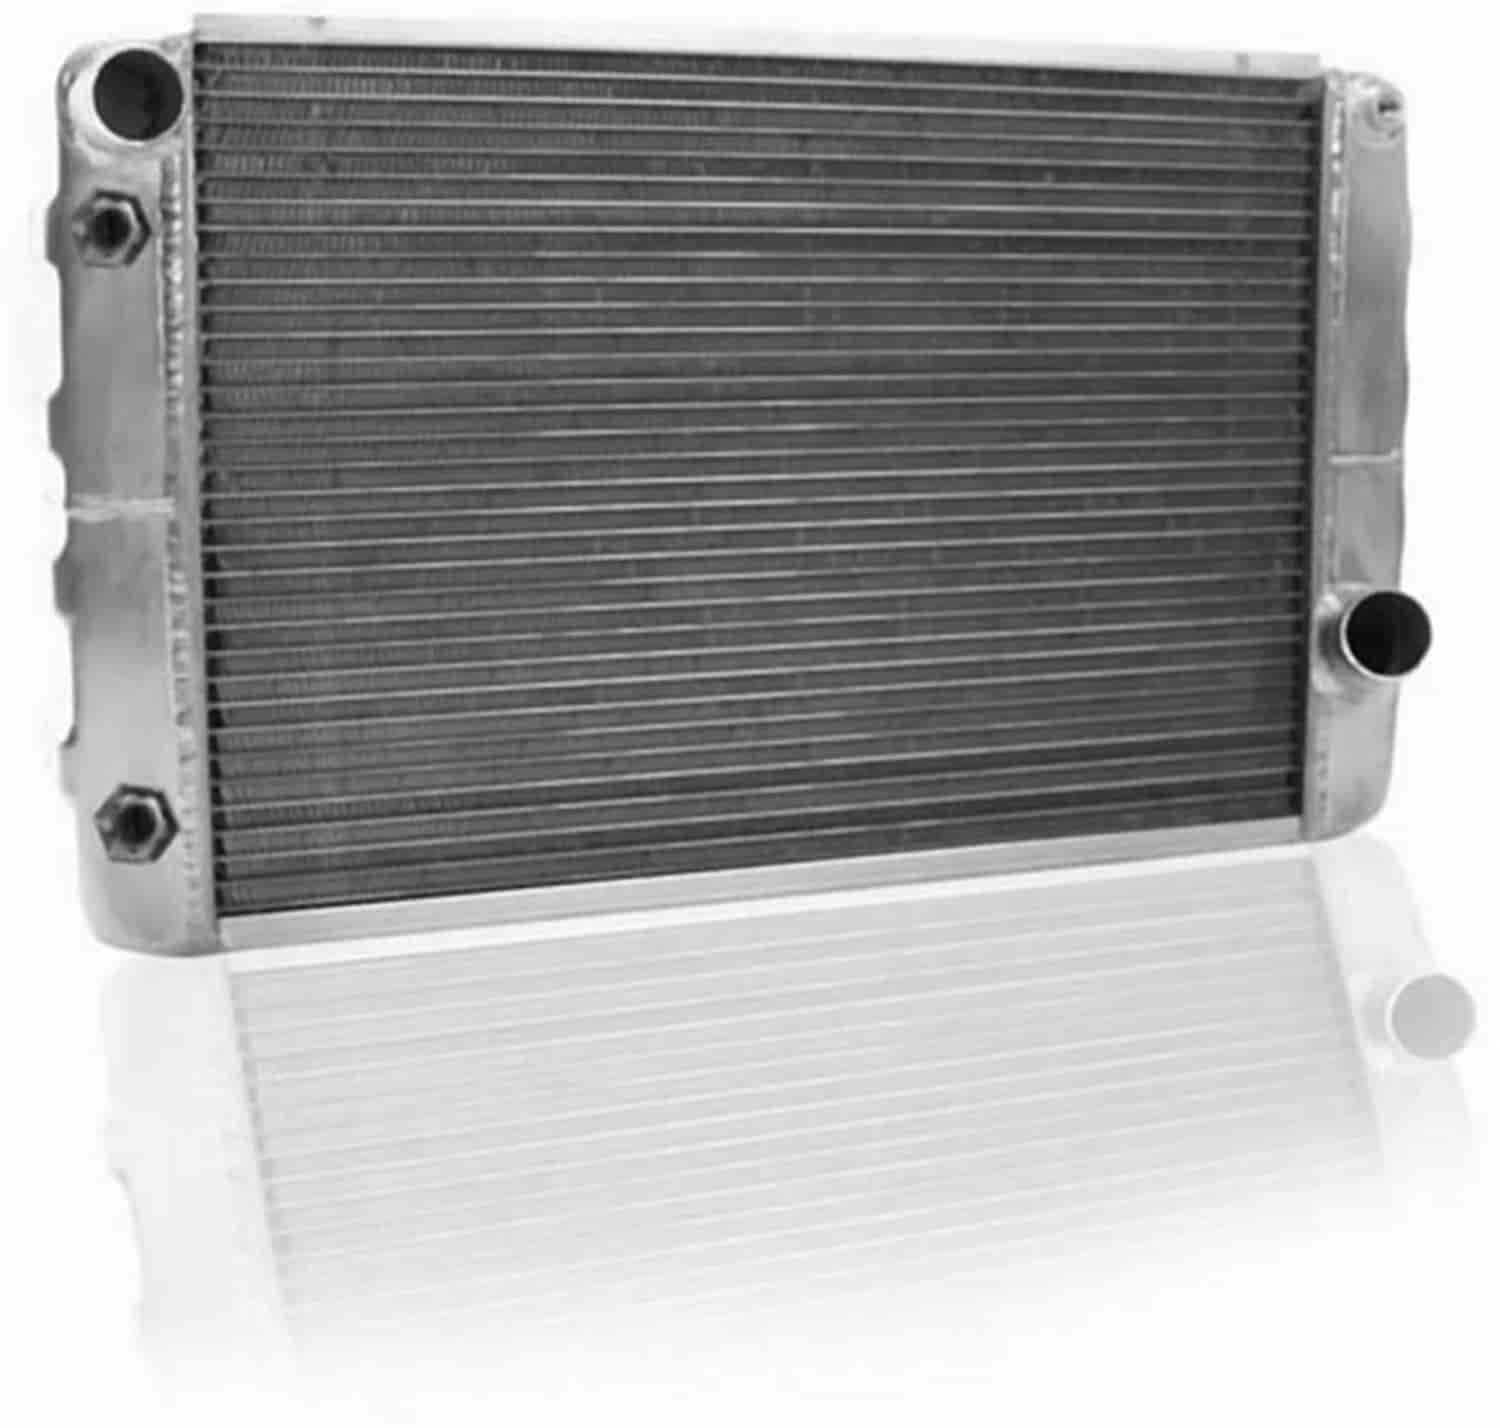 ClassicCool Universal Fit Radiator Single Pass Crossflow Design 26" x 15.50" with Transmission Cooler